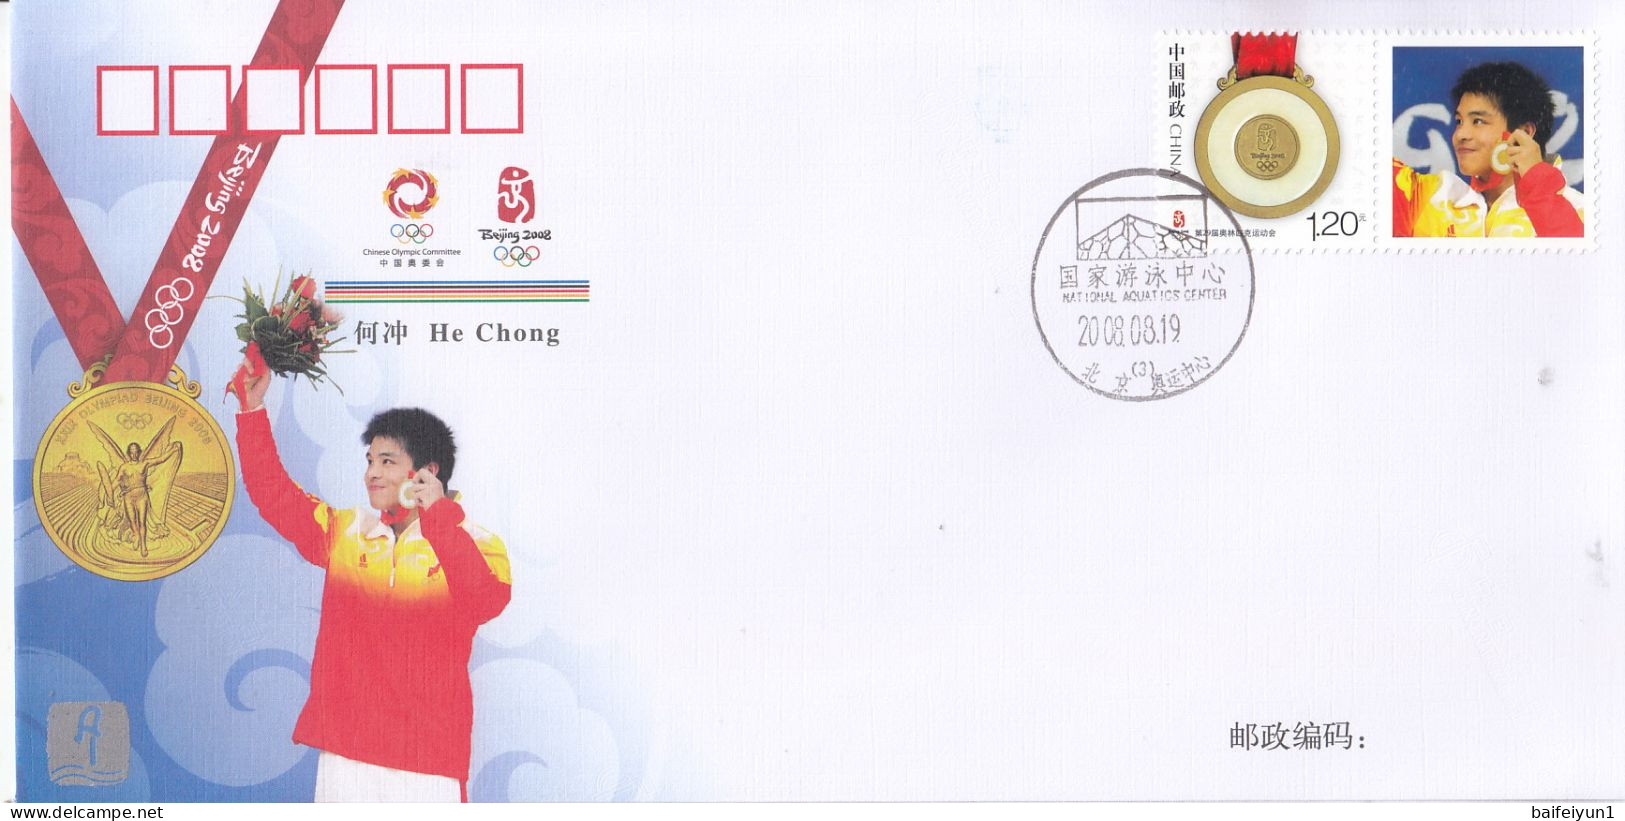 CHINA 2008 GPJF-1.51 Victory In Men's 3m Springboard In The Game Of The XXIX Olympiad Cover - Tauchen